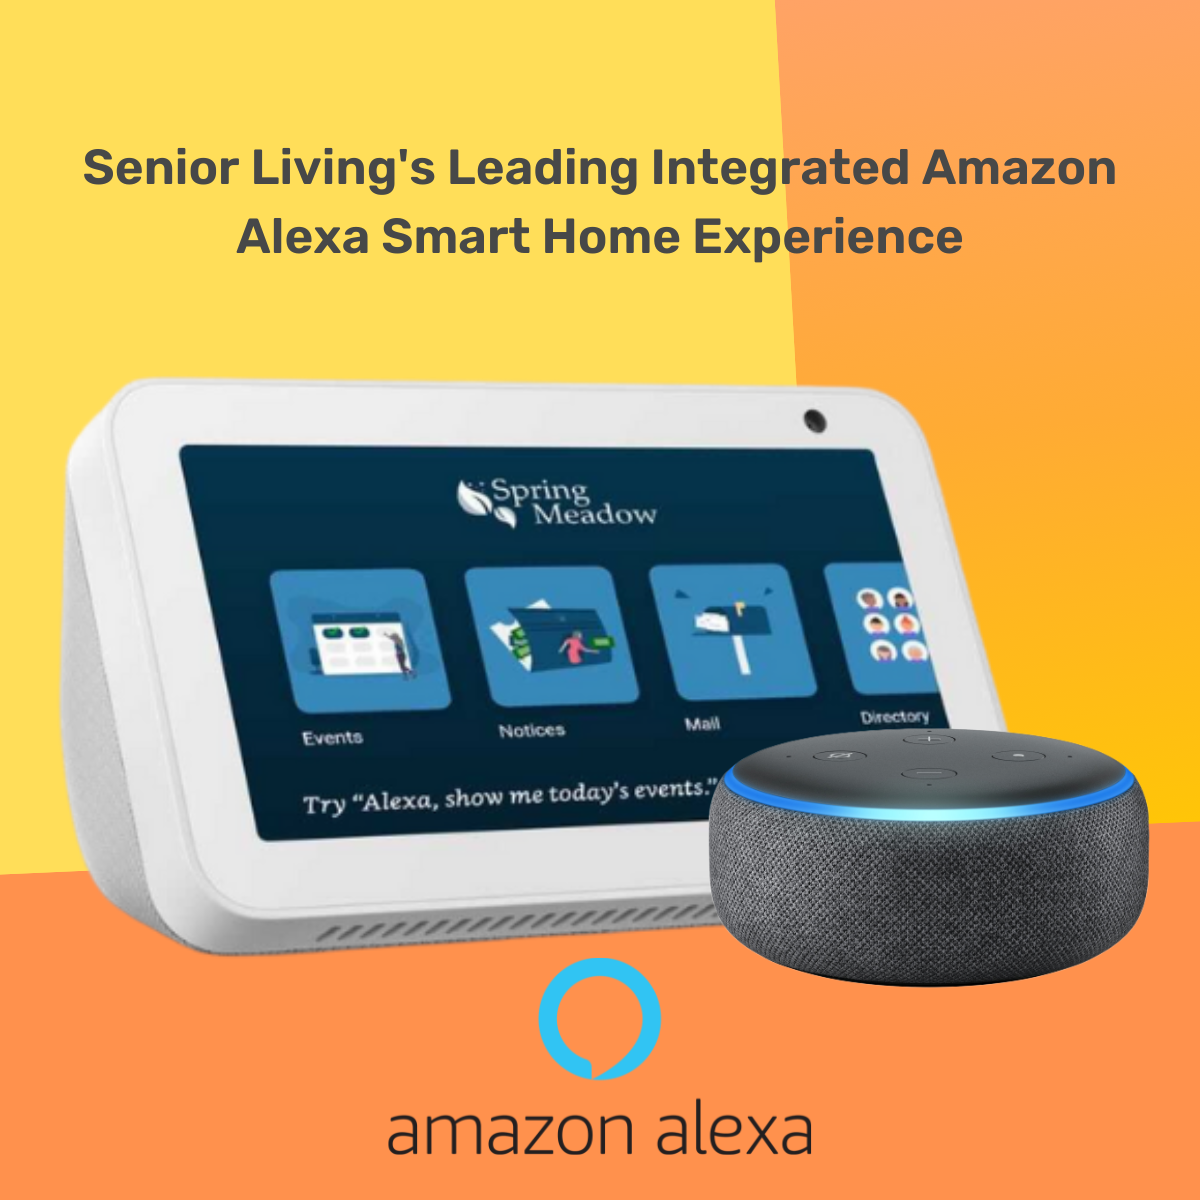 An Amazon Echo Show and Echo Dot are shown to demonstrate the K4Community Smart Home and Amazon Alexa integration